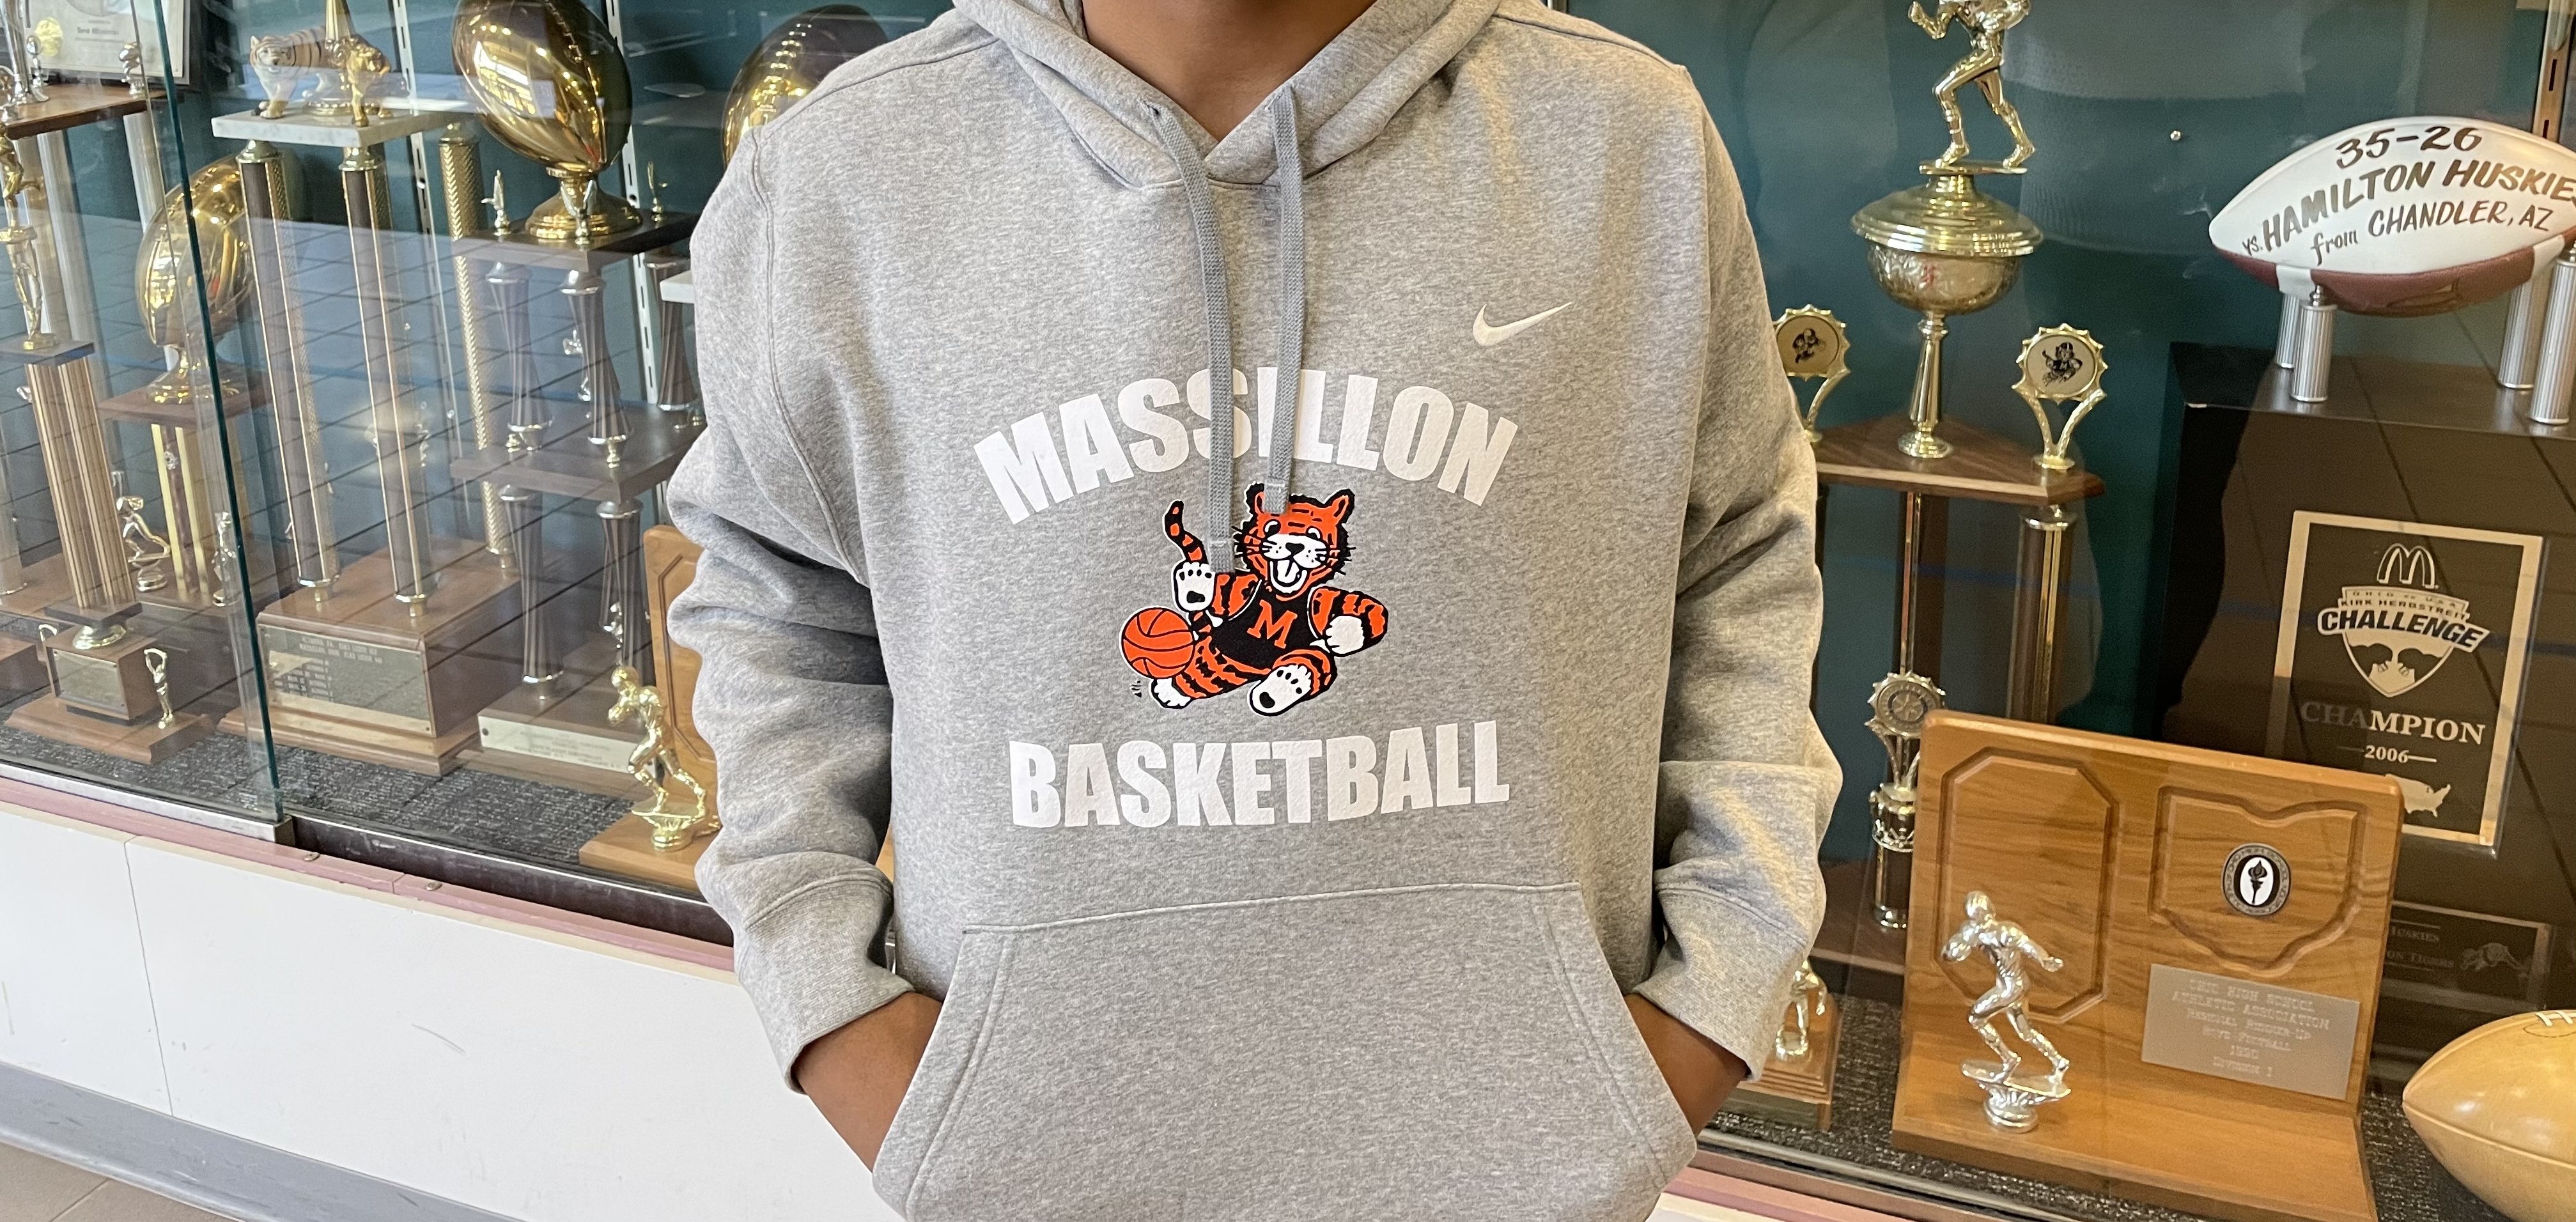 Basketball - Available in size x-large (Gray) $45